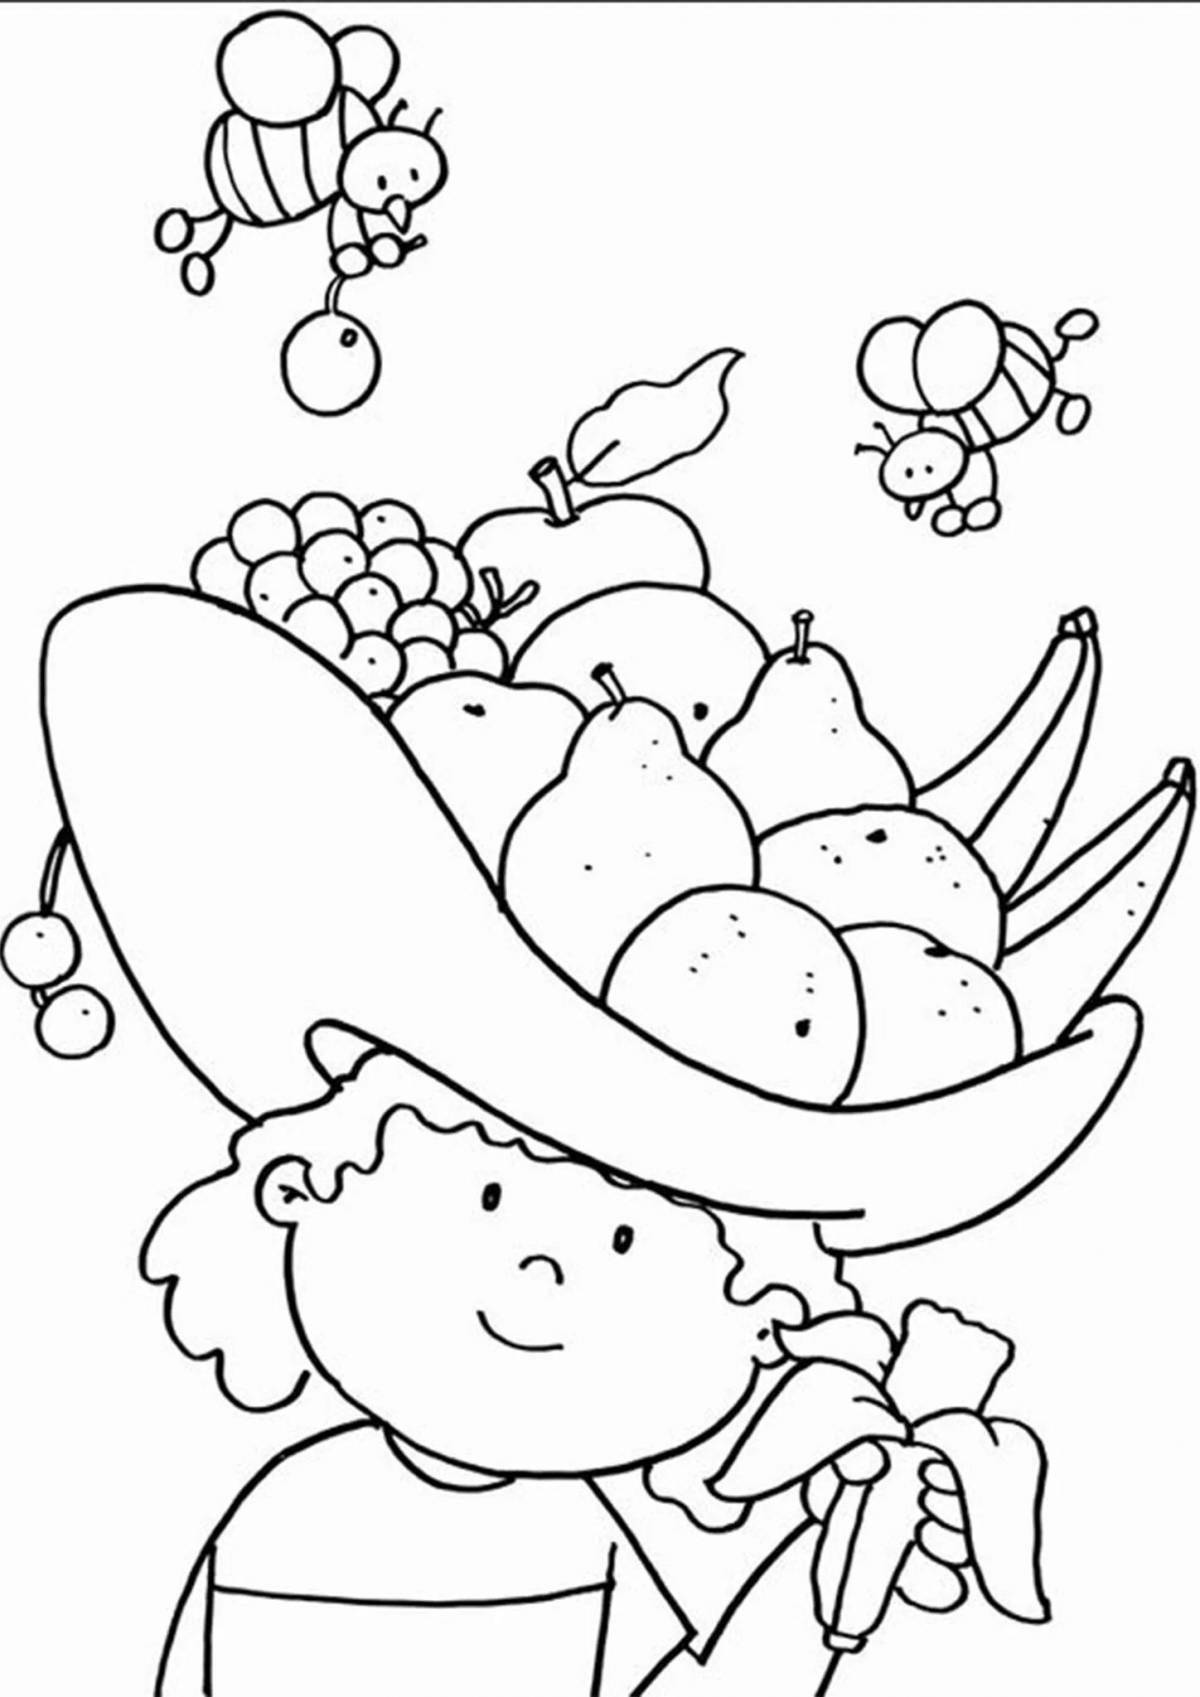 Children's coloring delicious food